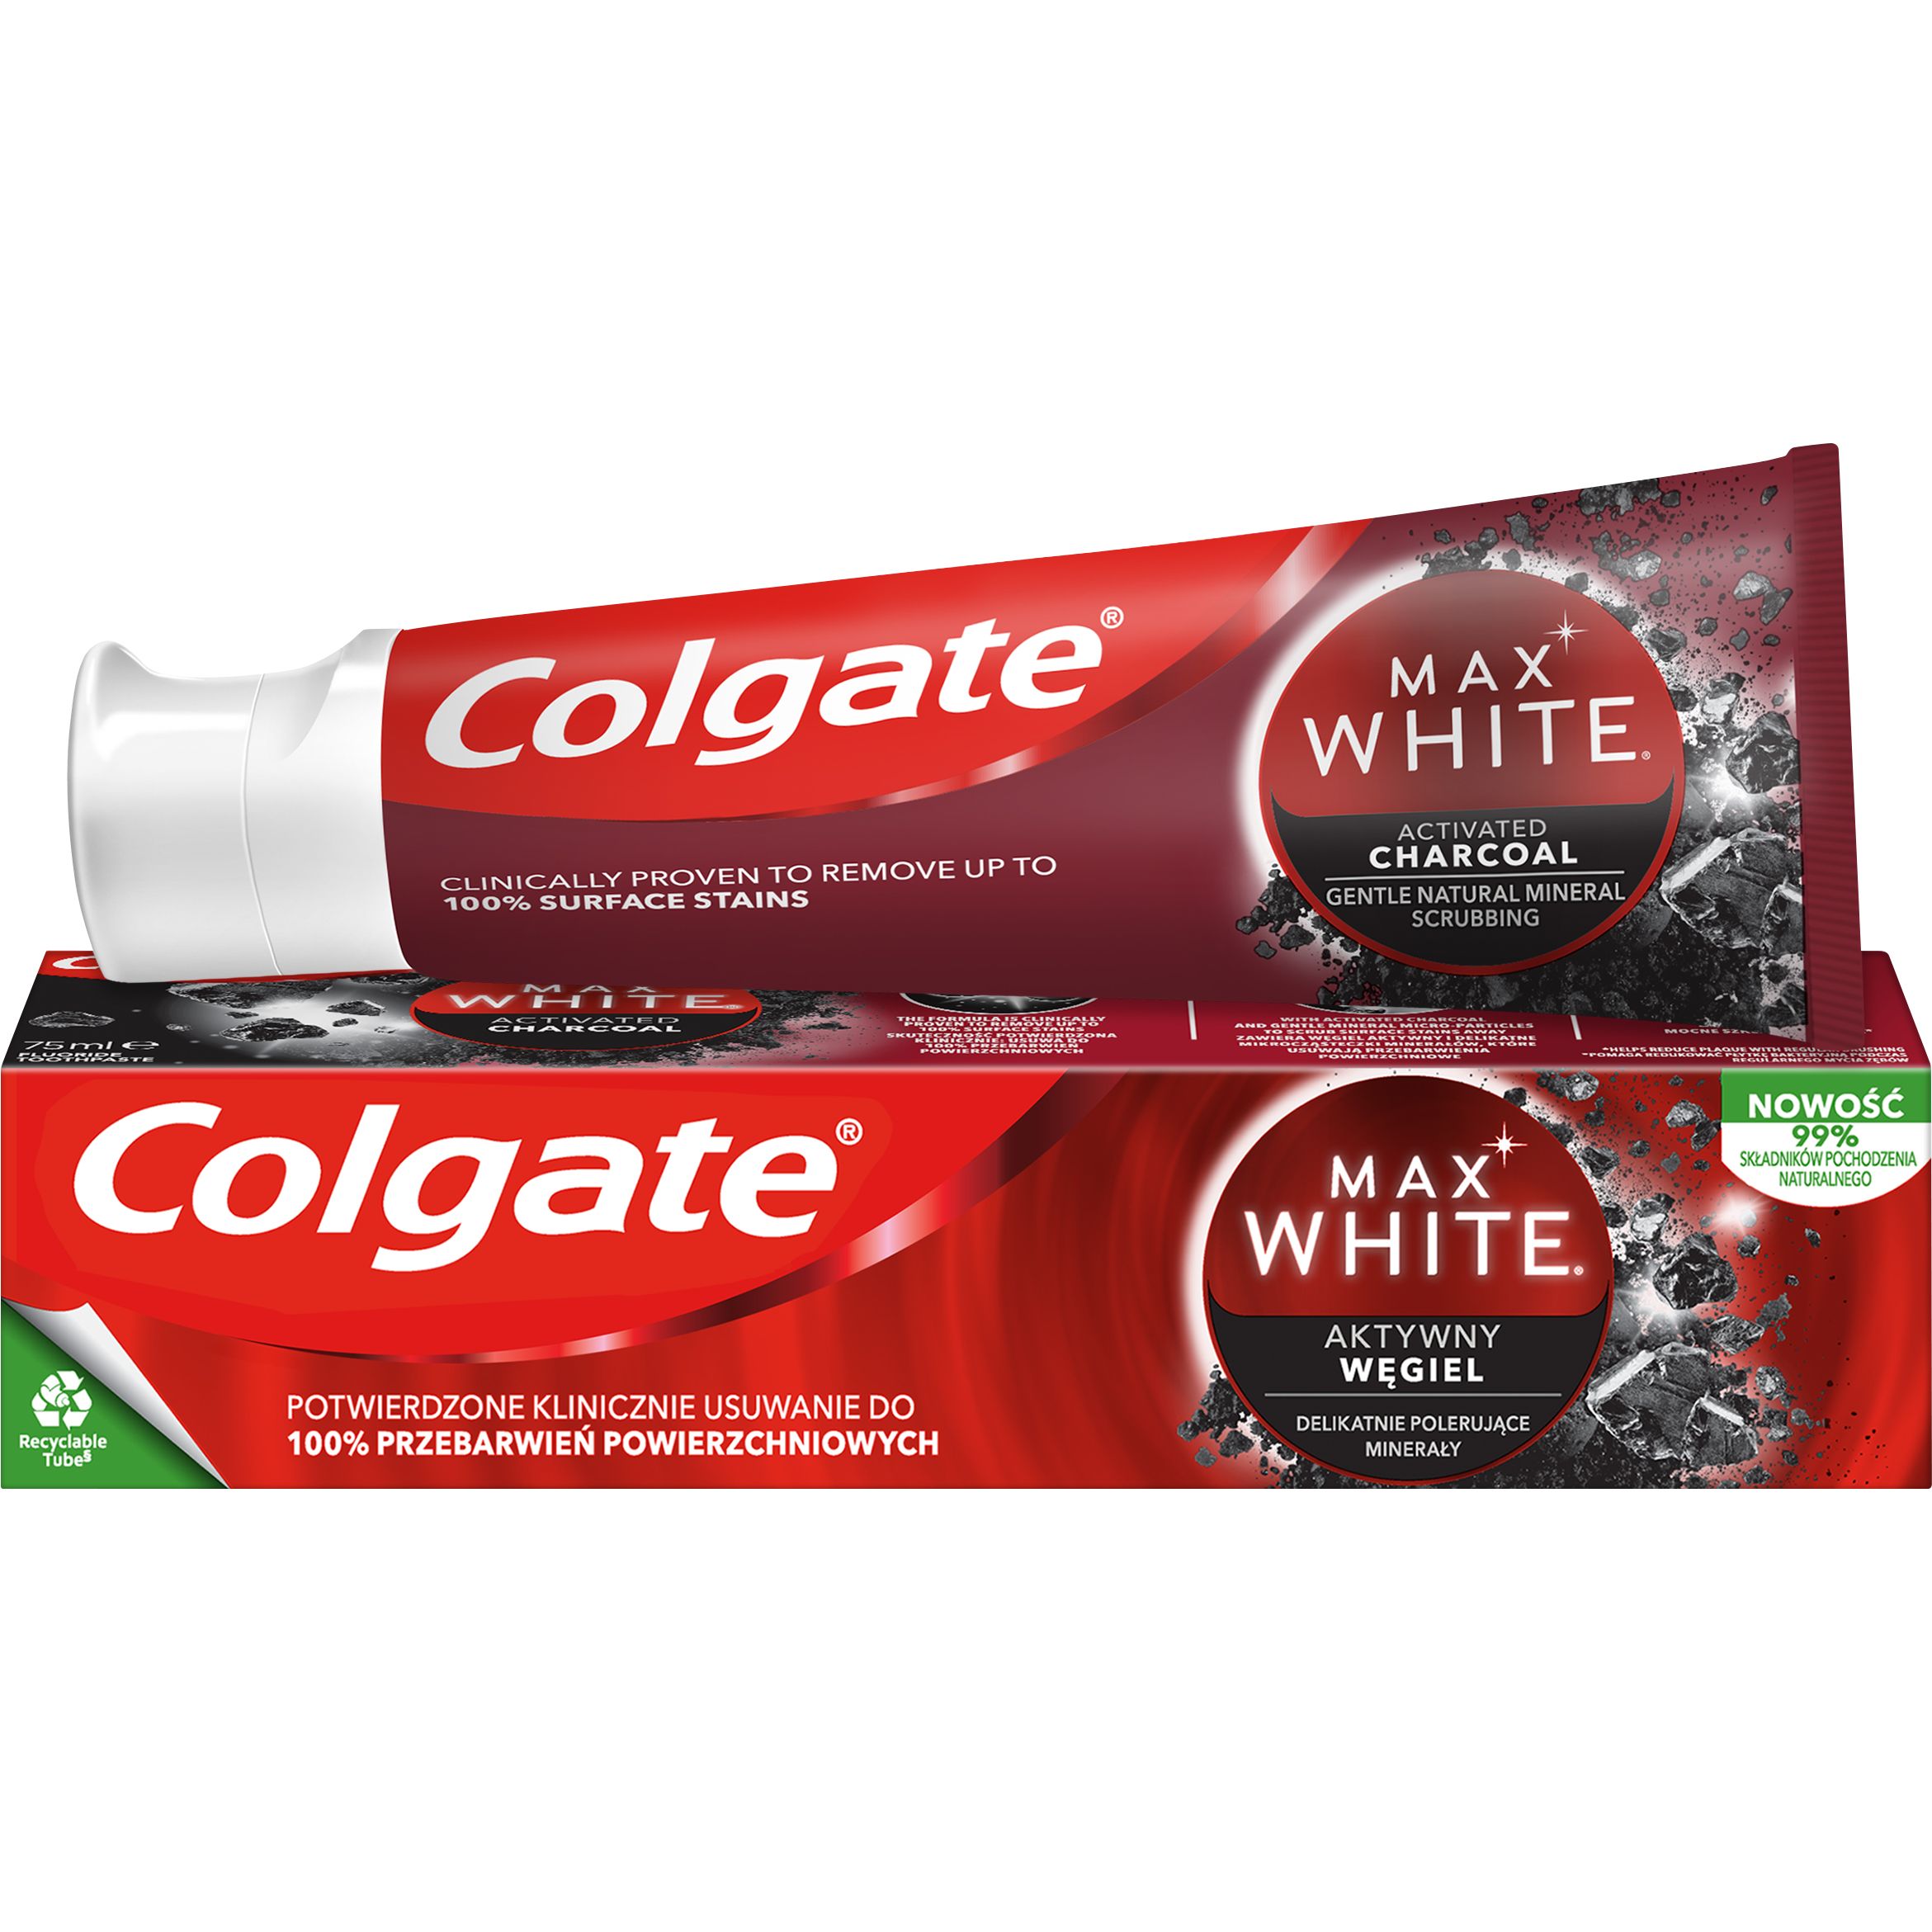 Зубная паста Colgate Max White Activated Charcoal 75 мл - фото 2